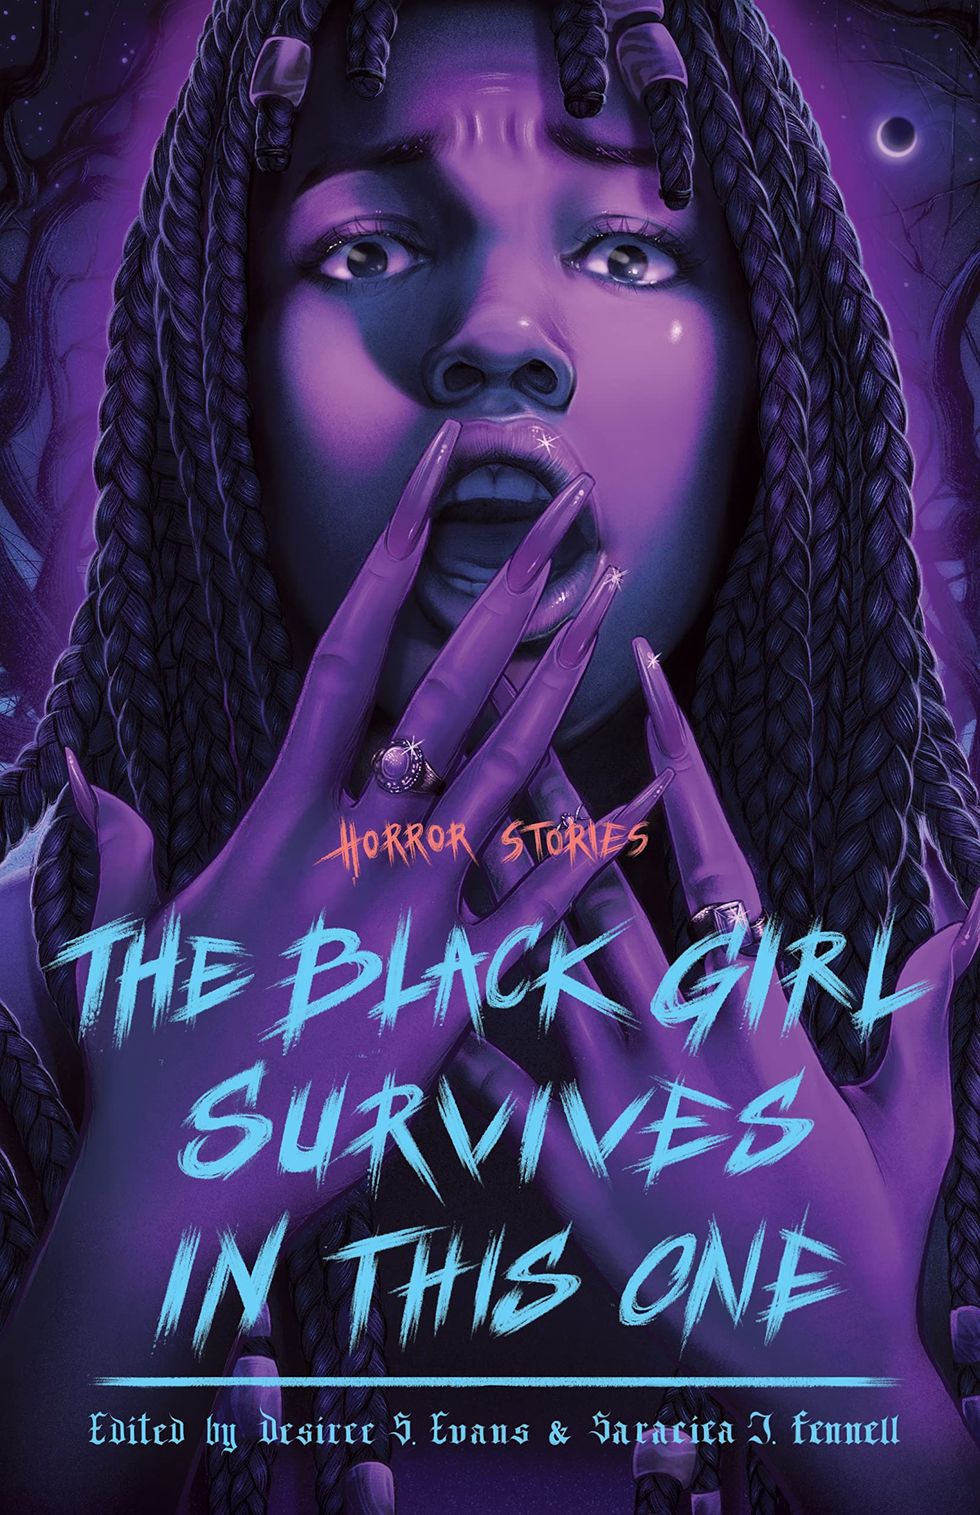 The Black Girl Survives in This One, edited by Desiree S. Evans and Saraciea J. Fennell 